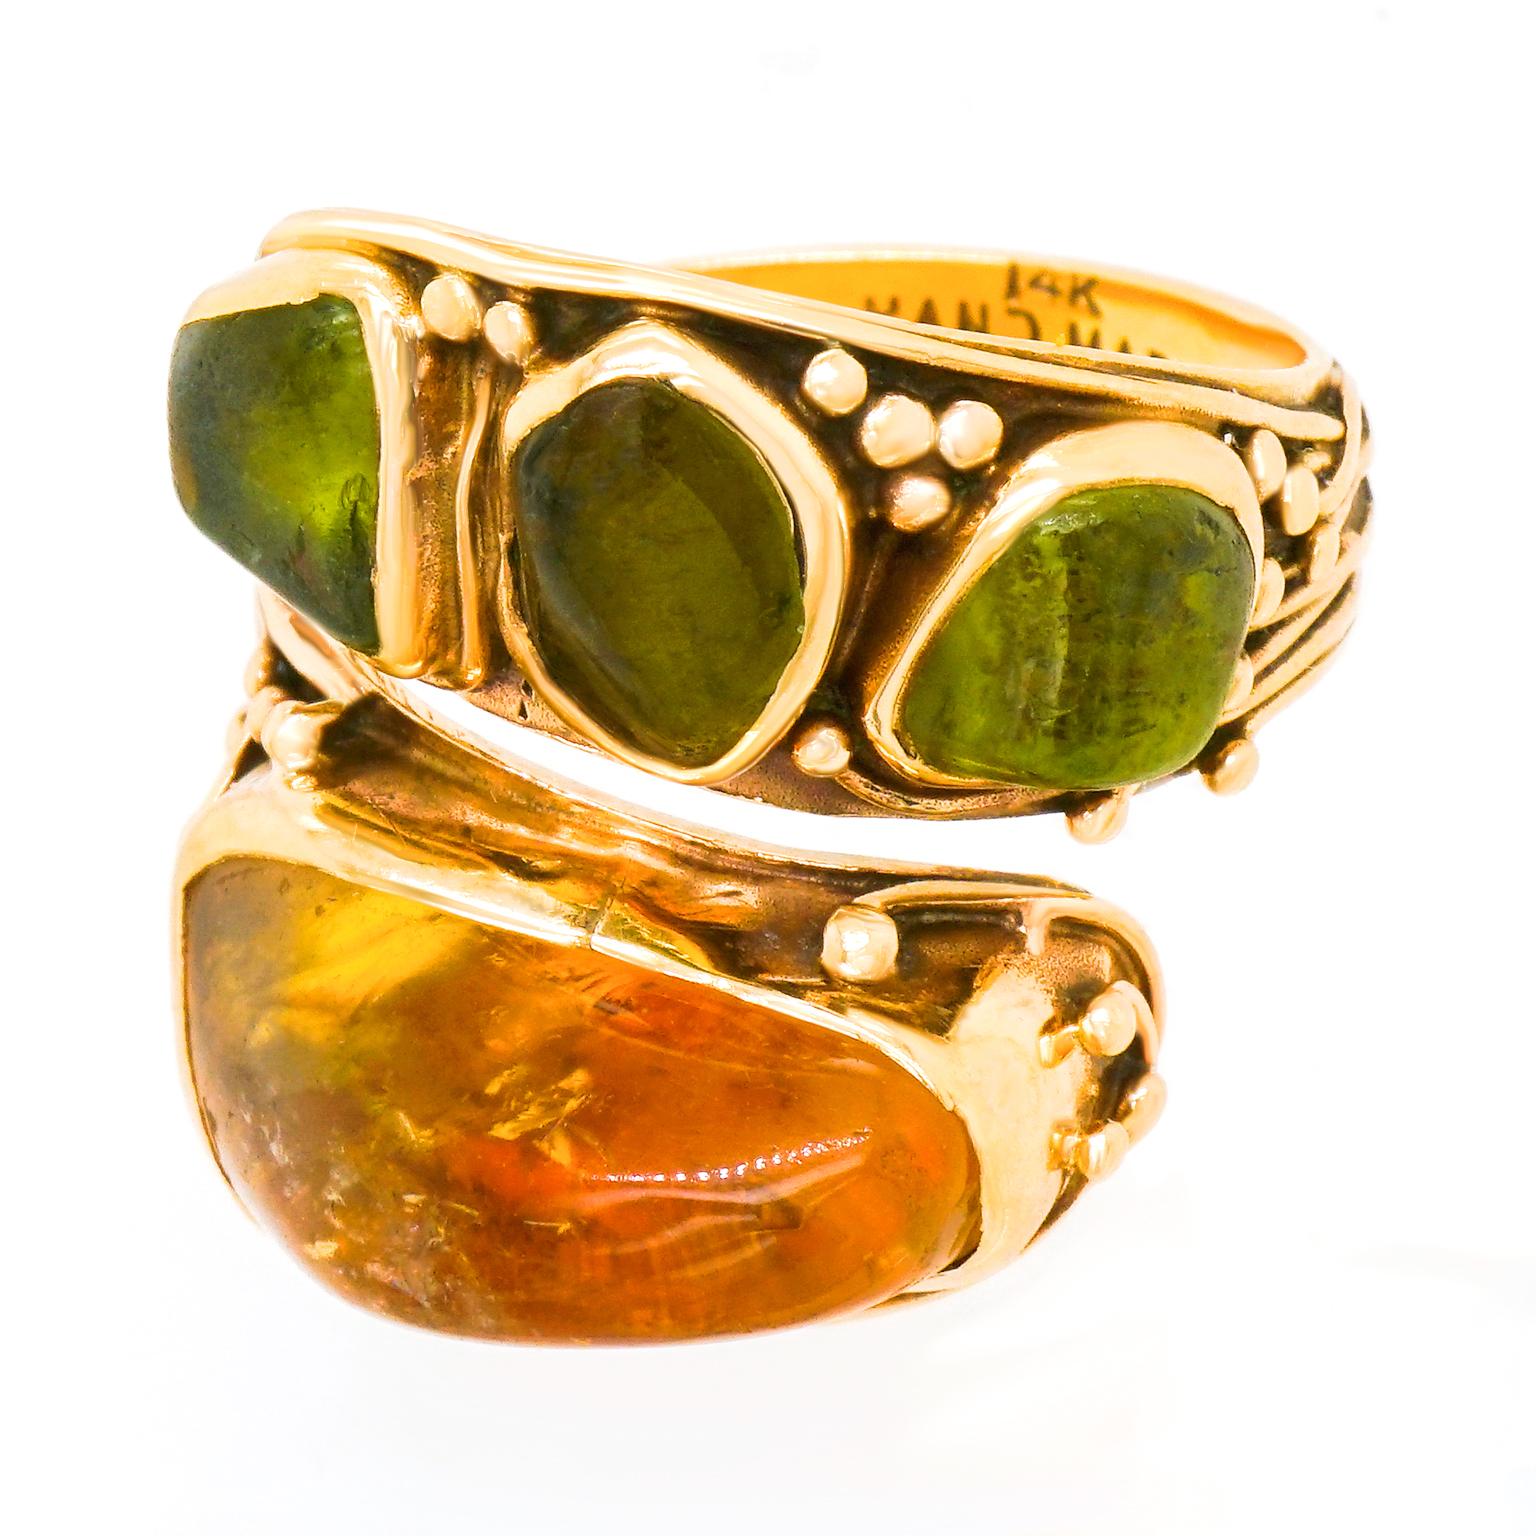 Fred Skaggs Gold Citrine and Peridot Hippie Ring 4